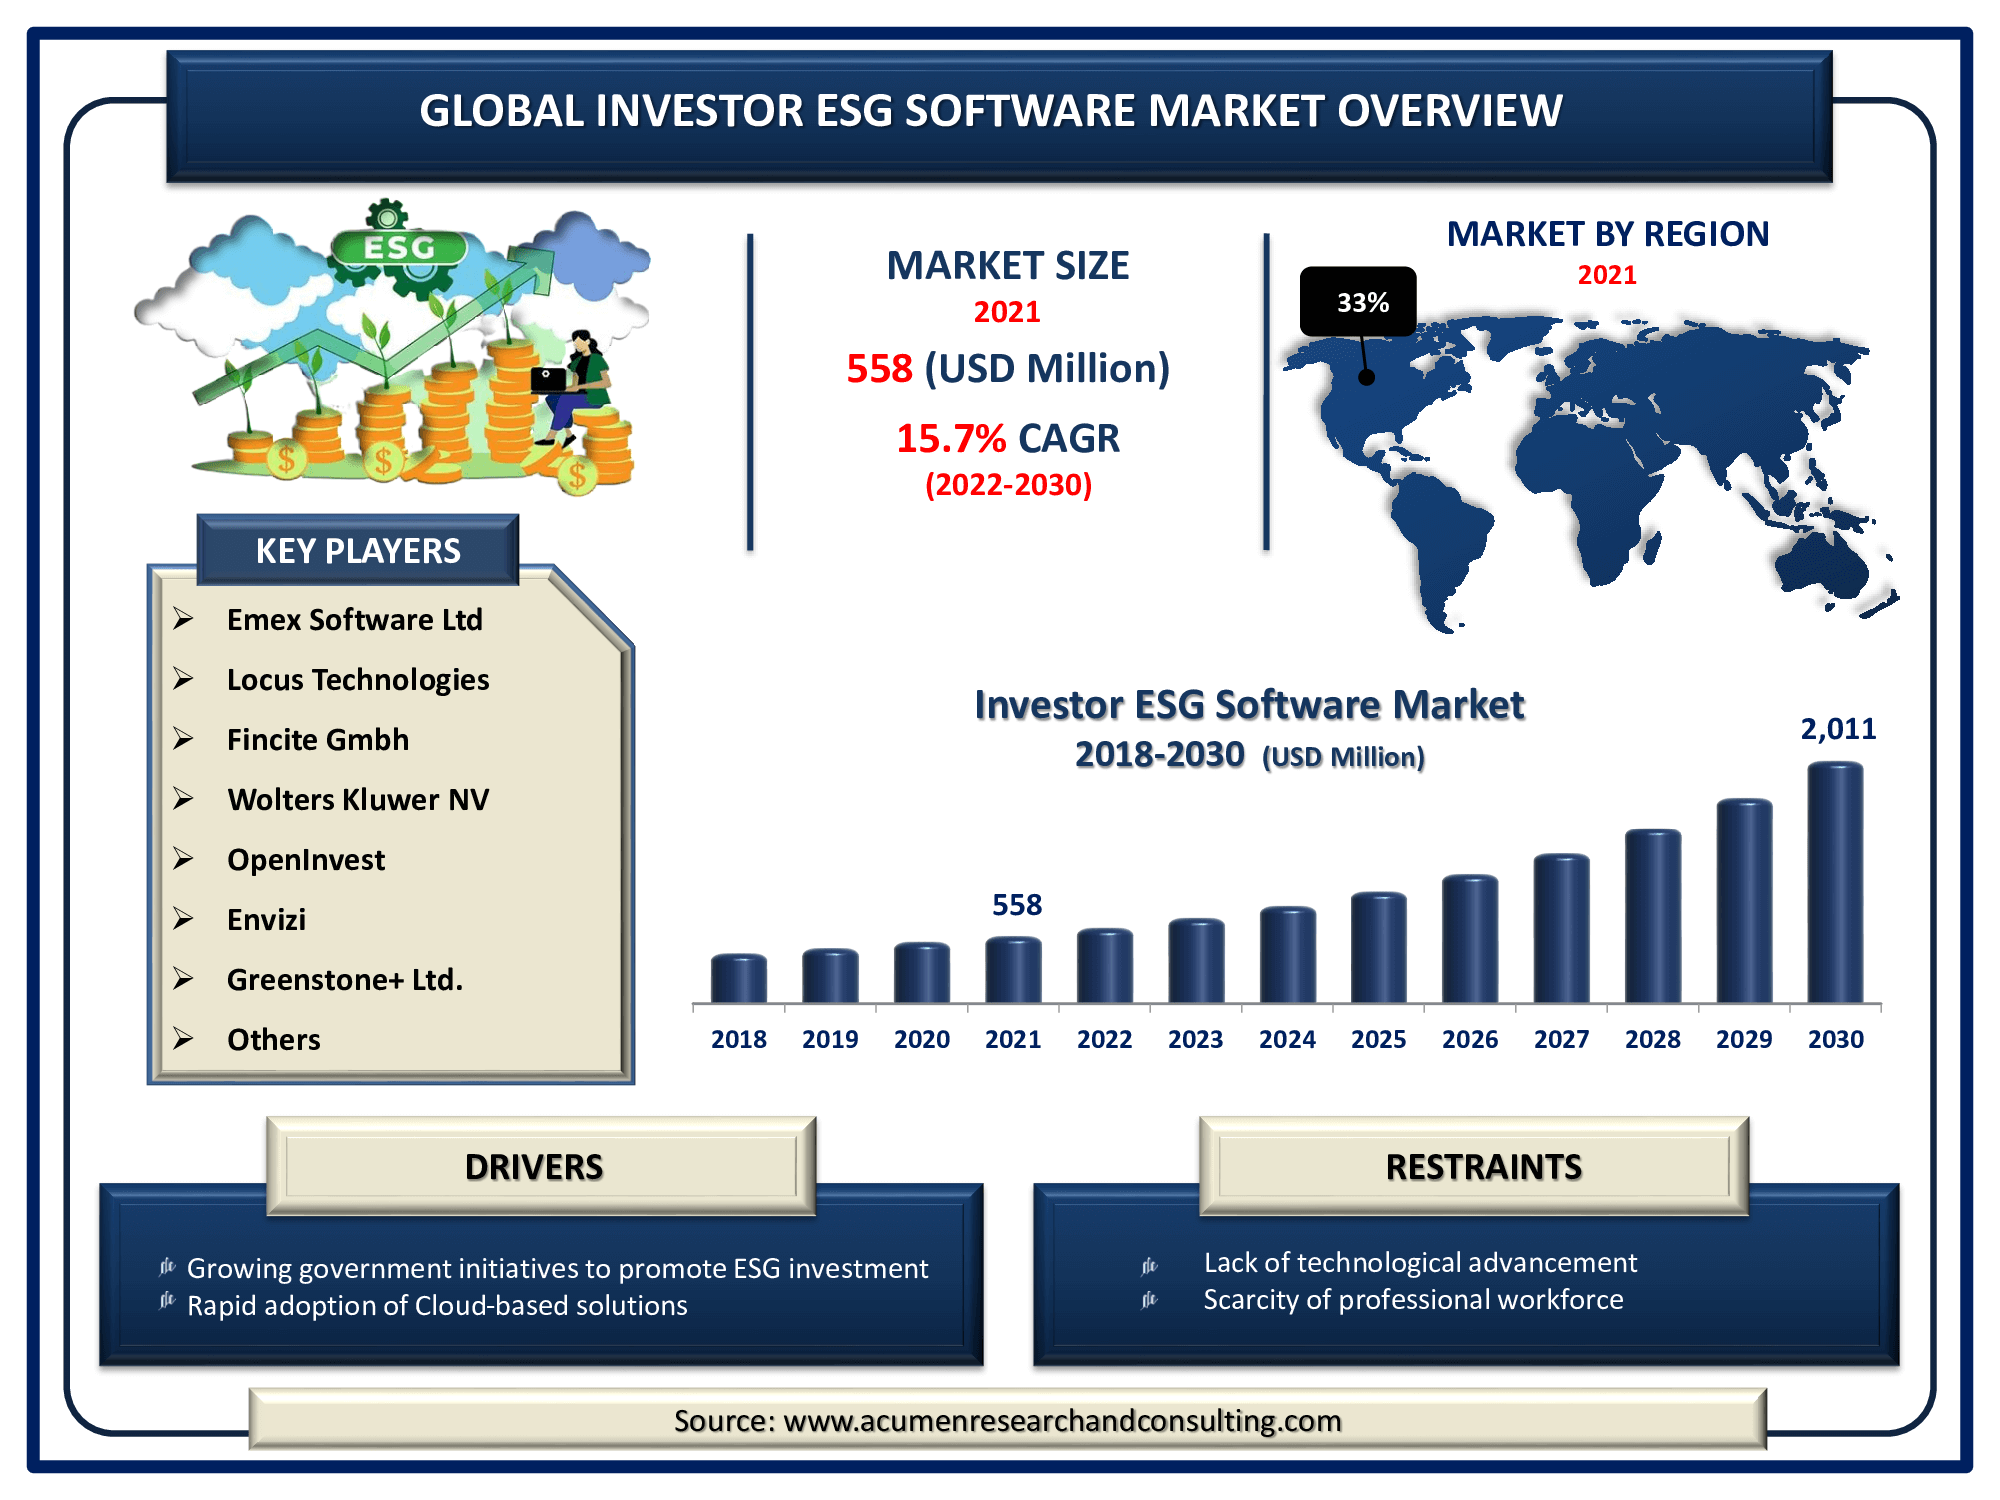 The Global Investor ESG Software Market Size Accounted for USD 558 Million in 2021 and is predicted to be worth USD 2,011 Million by 2030, with a CAGR of 15.7% during the forthcoming period from 2022 to 2030.